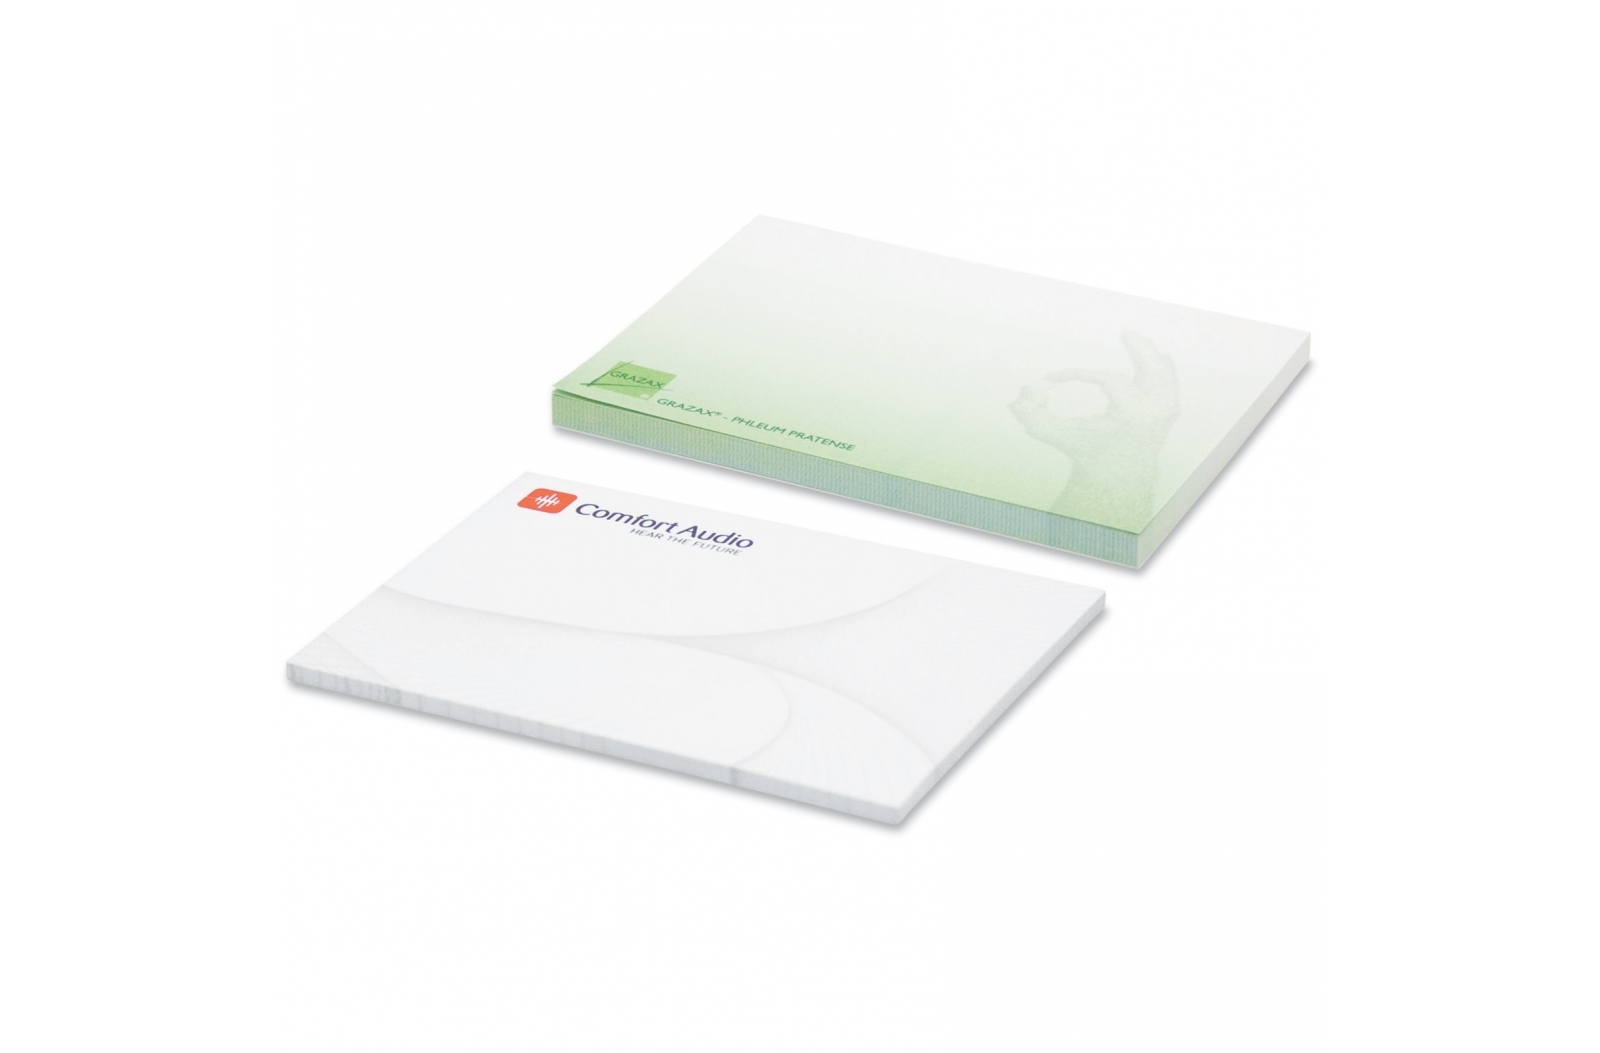 Adhesive Notes with Full-Color Imprint - Nairn